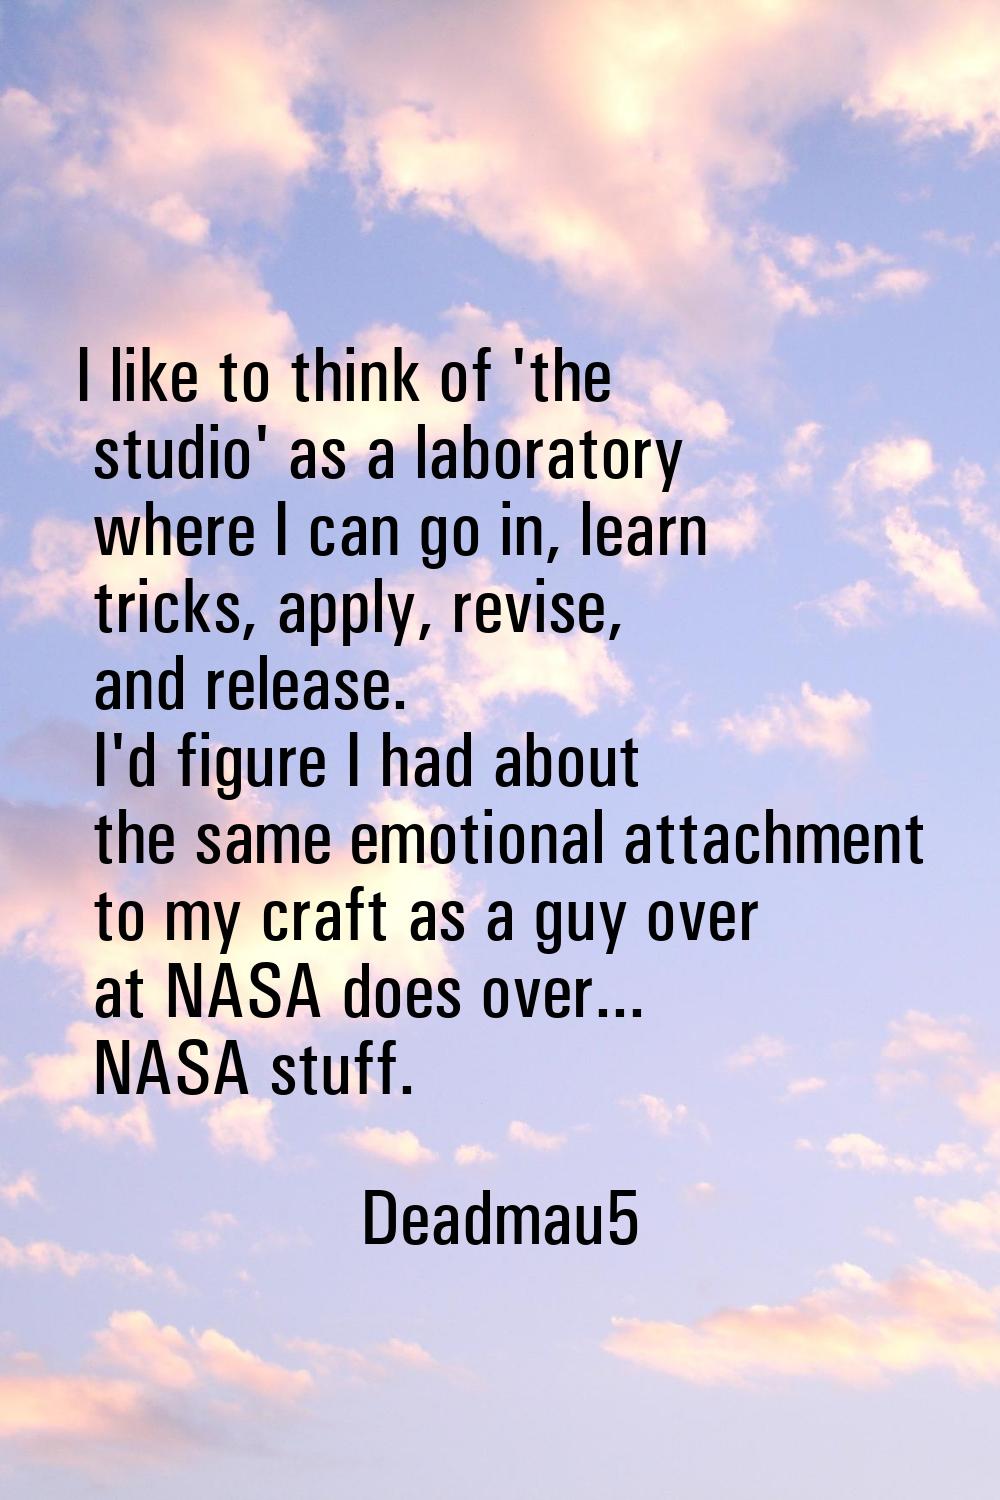 I like to think of 'the studio' as a laboratory where I can go in, learn tricks, apply, revise, and